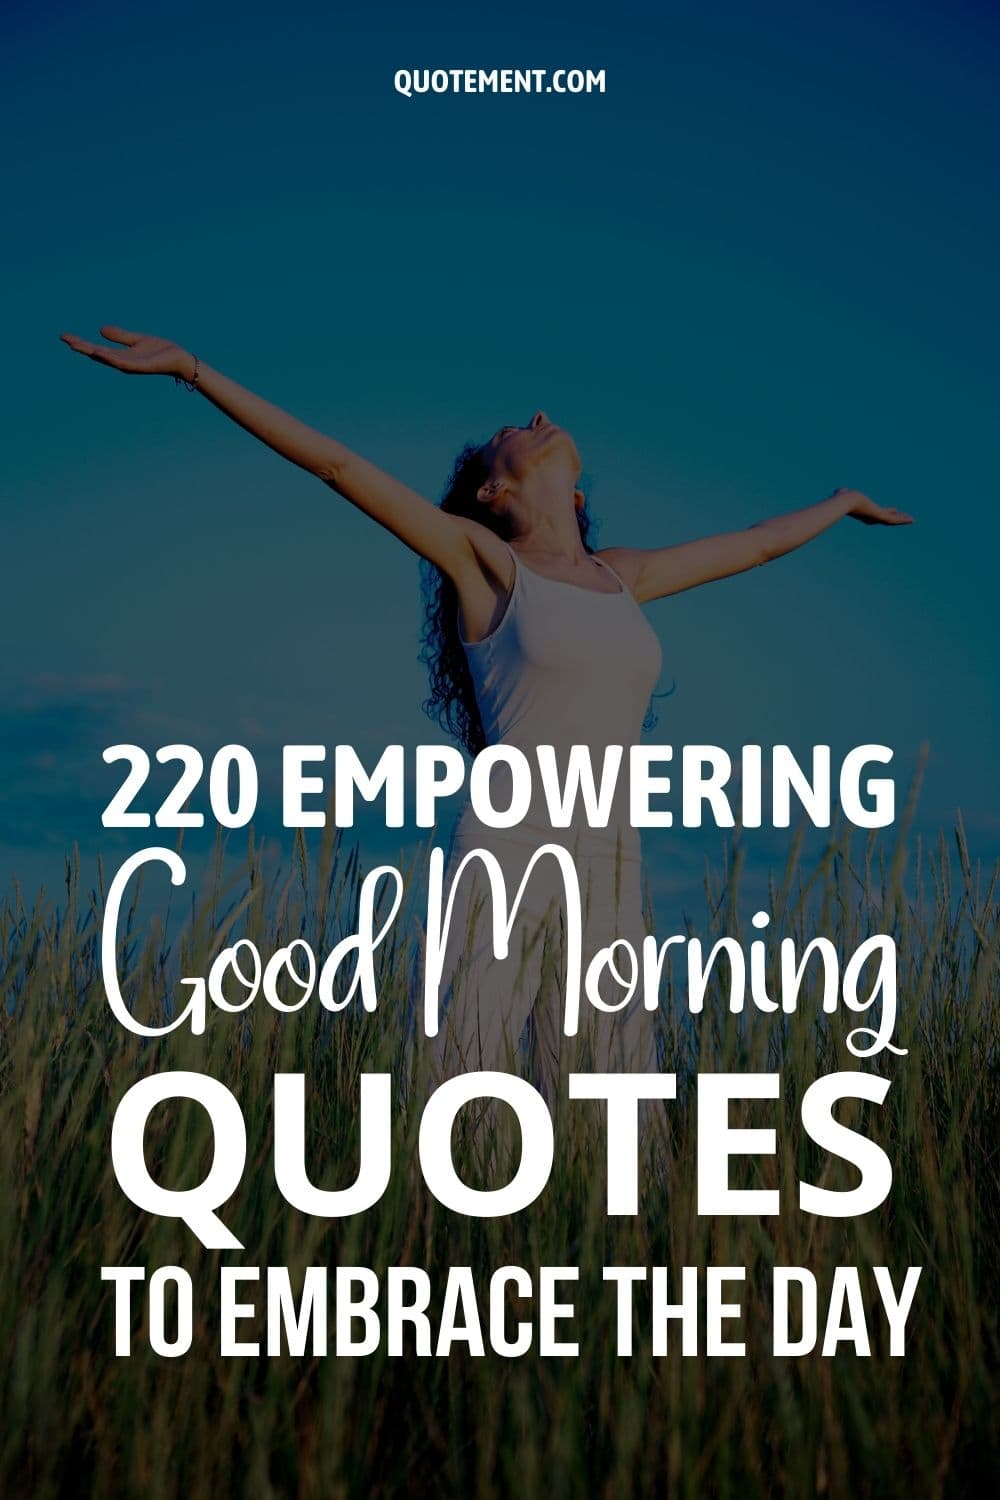 220 Empowering Good Morning Quotes To Embrace The Day